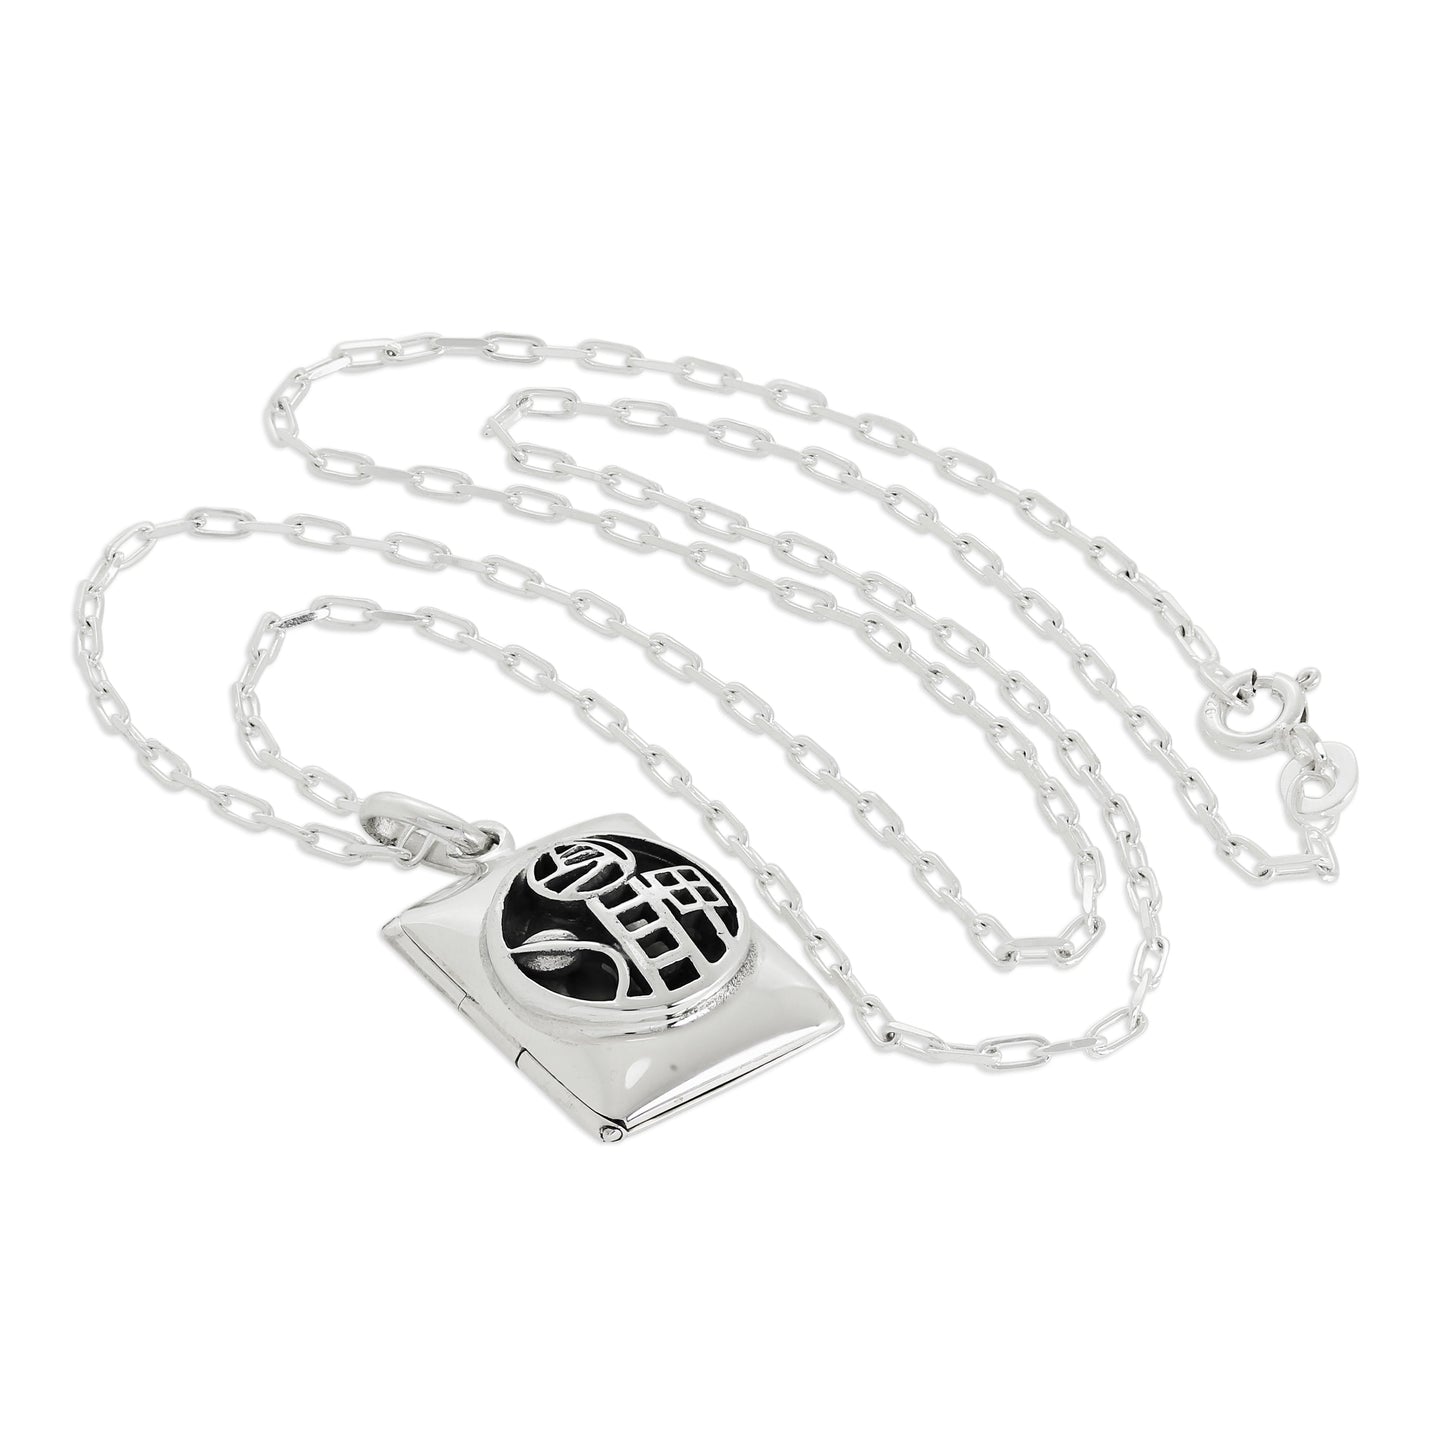 Sterling Silver Rectangular Mackintosh Style Locket on Chain 16 - 24 Inches